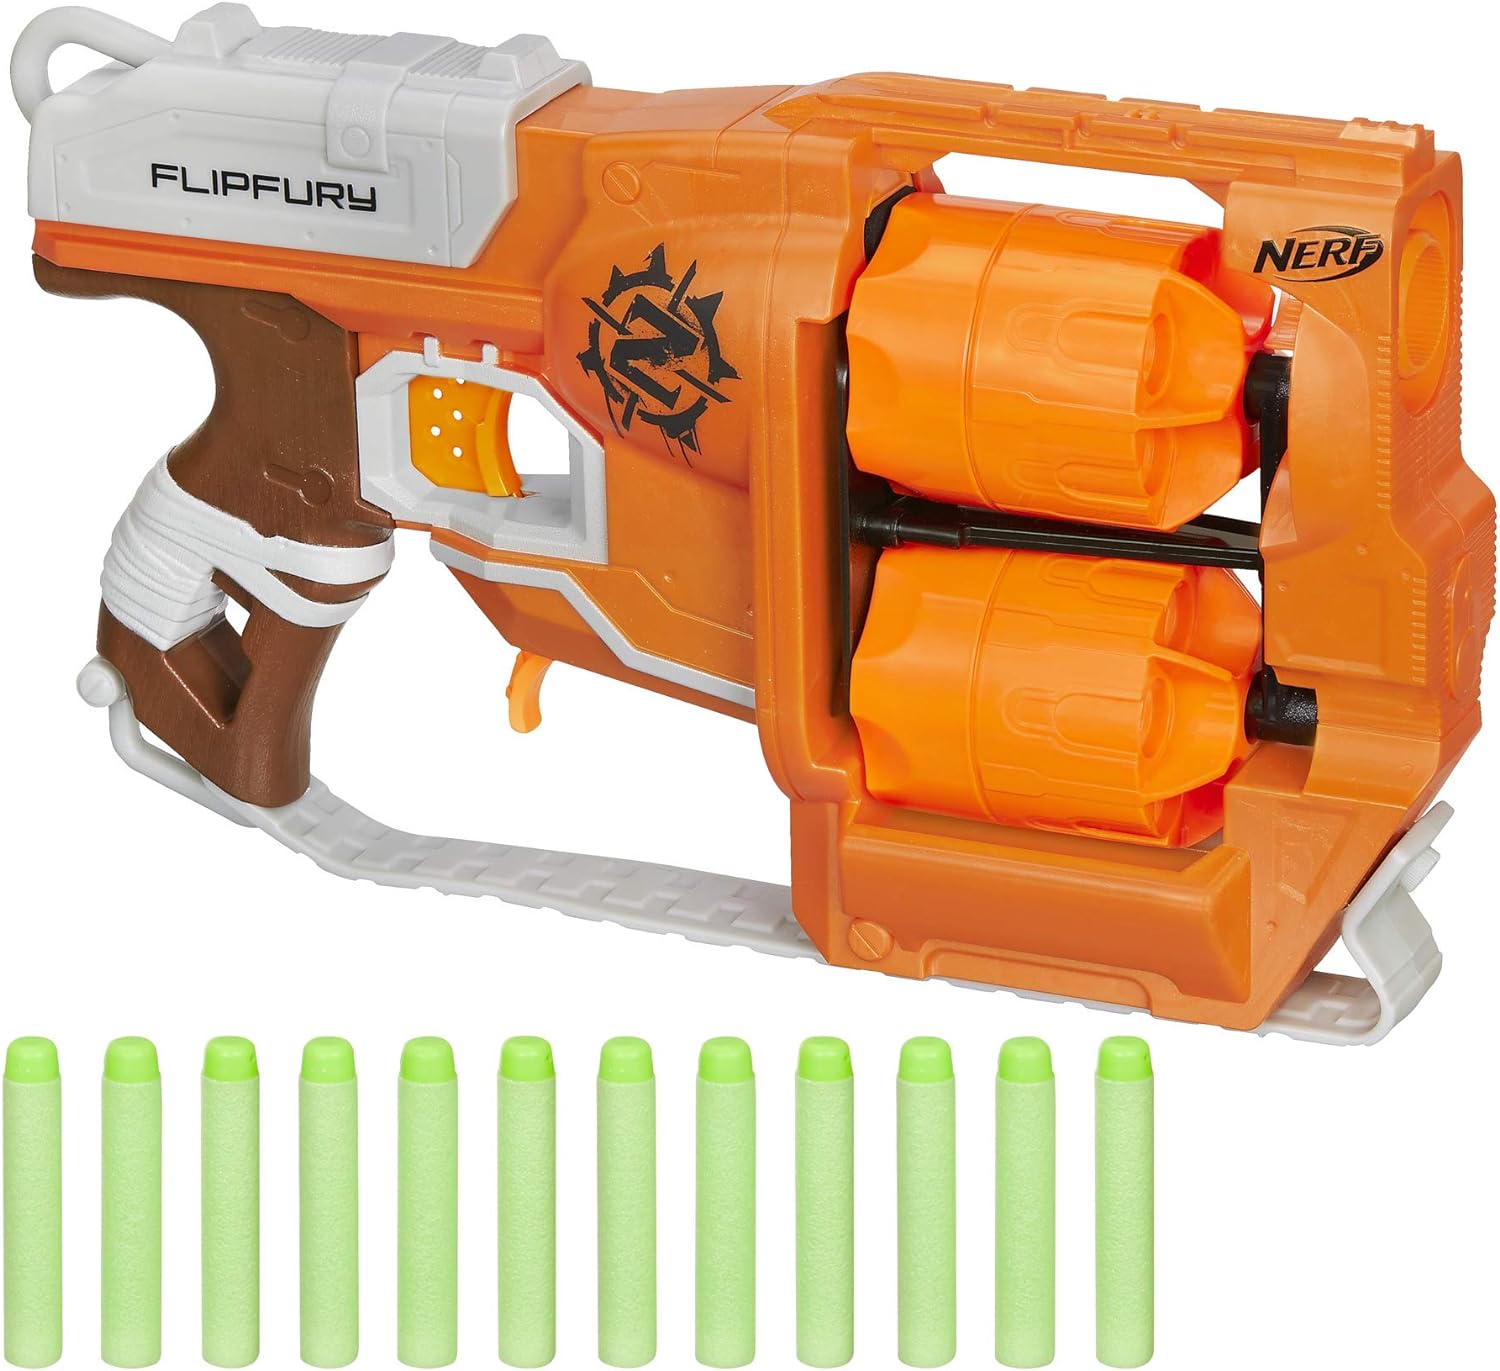 I ordered this as a used item and it was probably a return, These guys can be kinda hard to cock vs. say a strongarm or something, not sure why. This one is a little stiff but as an adult I can work it fairly easily. Really whips the darts across the room. I recently got into nerf guns cause my girlfriends kids have them and the son got the huge $100 minigun for christmas. This gun doesnt hold a candle to that 50 shot beast but it does give me a fighting chance. The flip function is very solid a